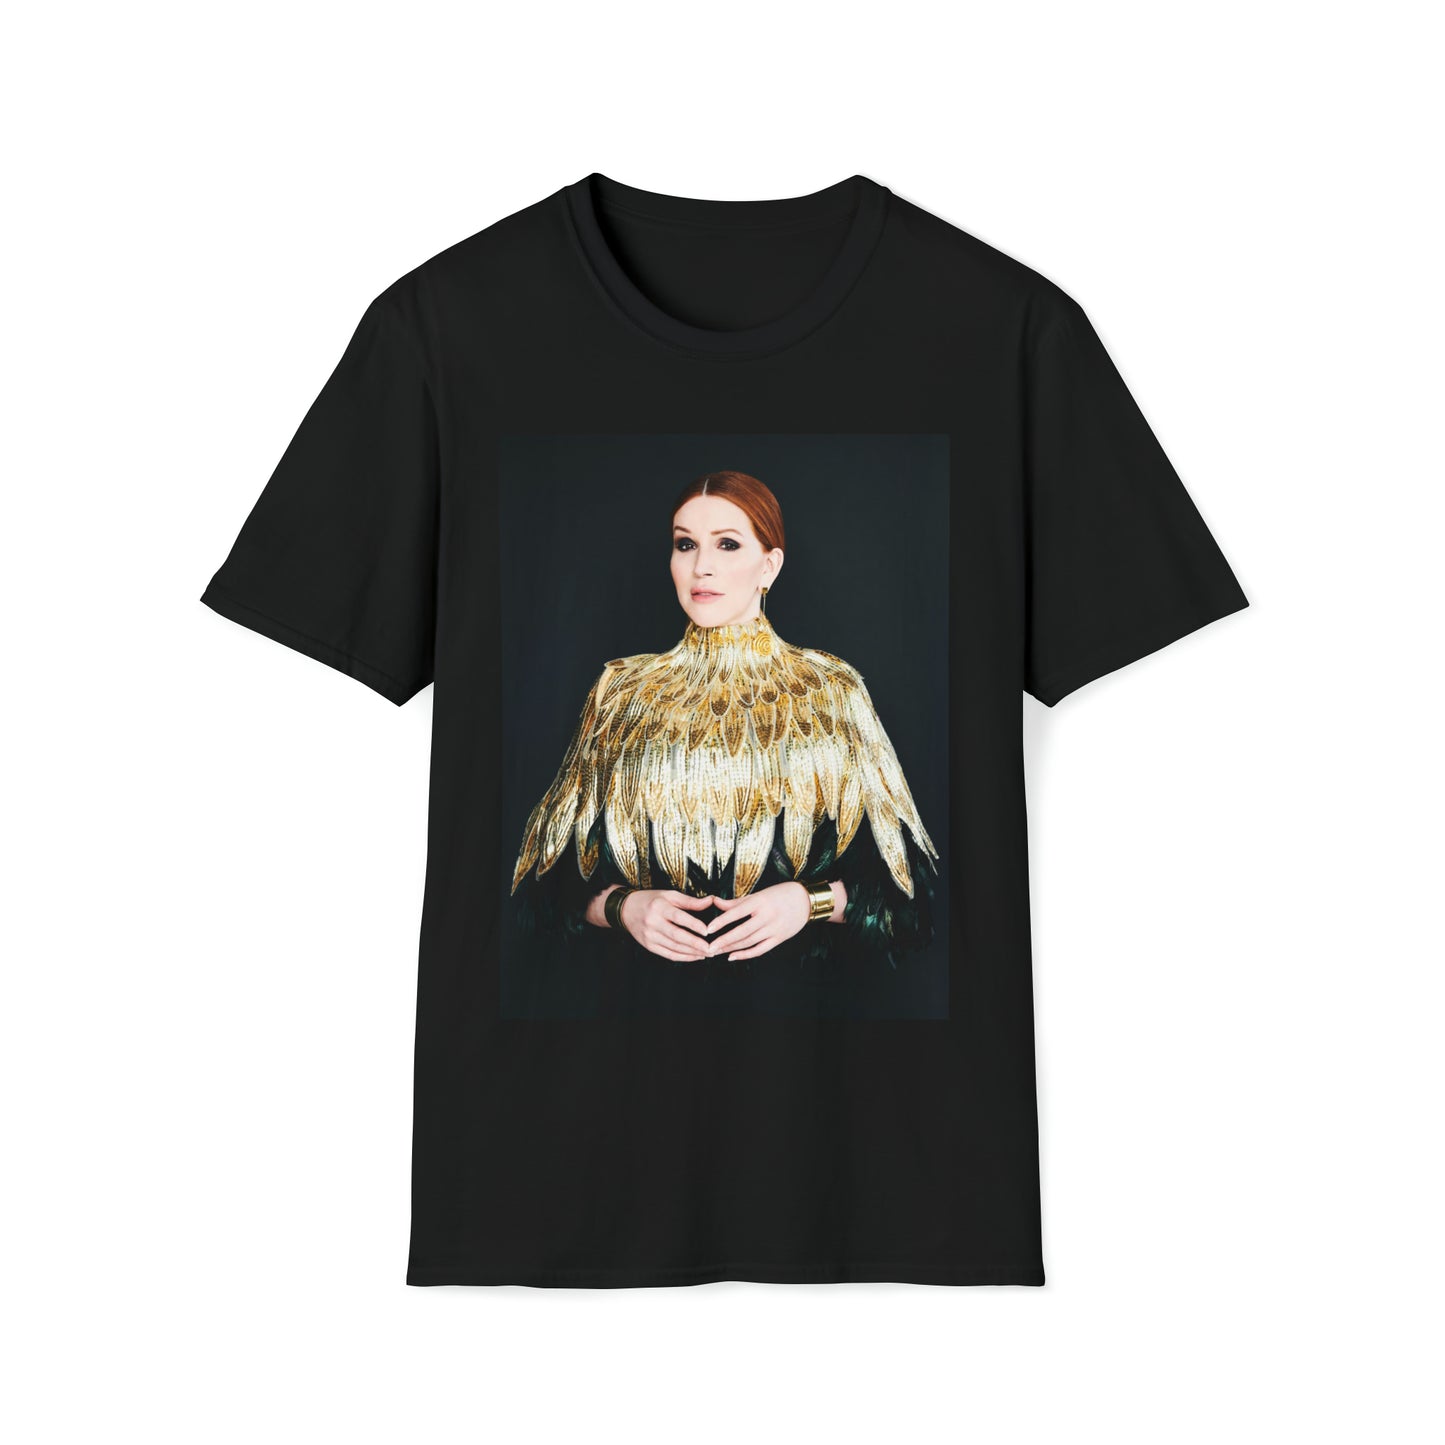 Our Lady J "Golden Wings" Softstyle T-Shirt